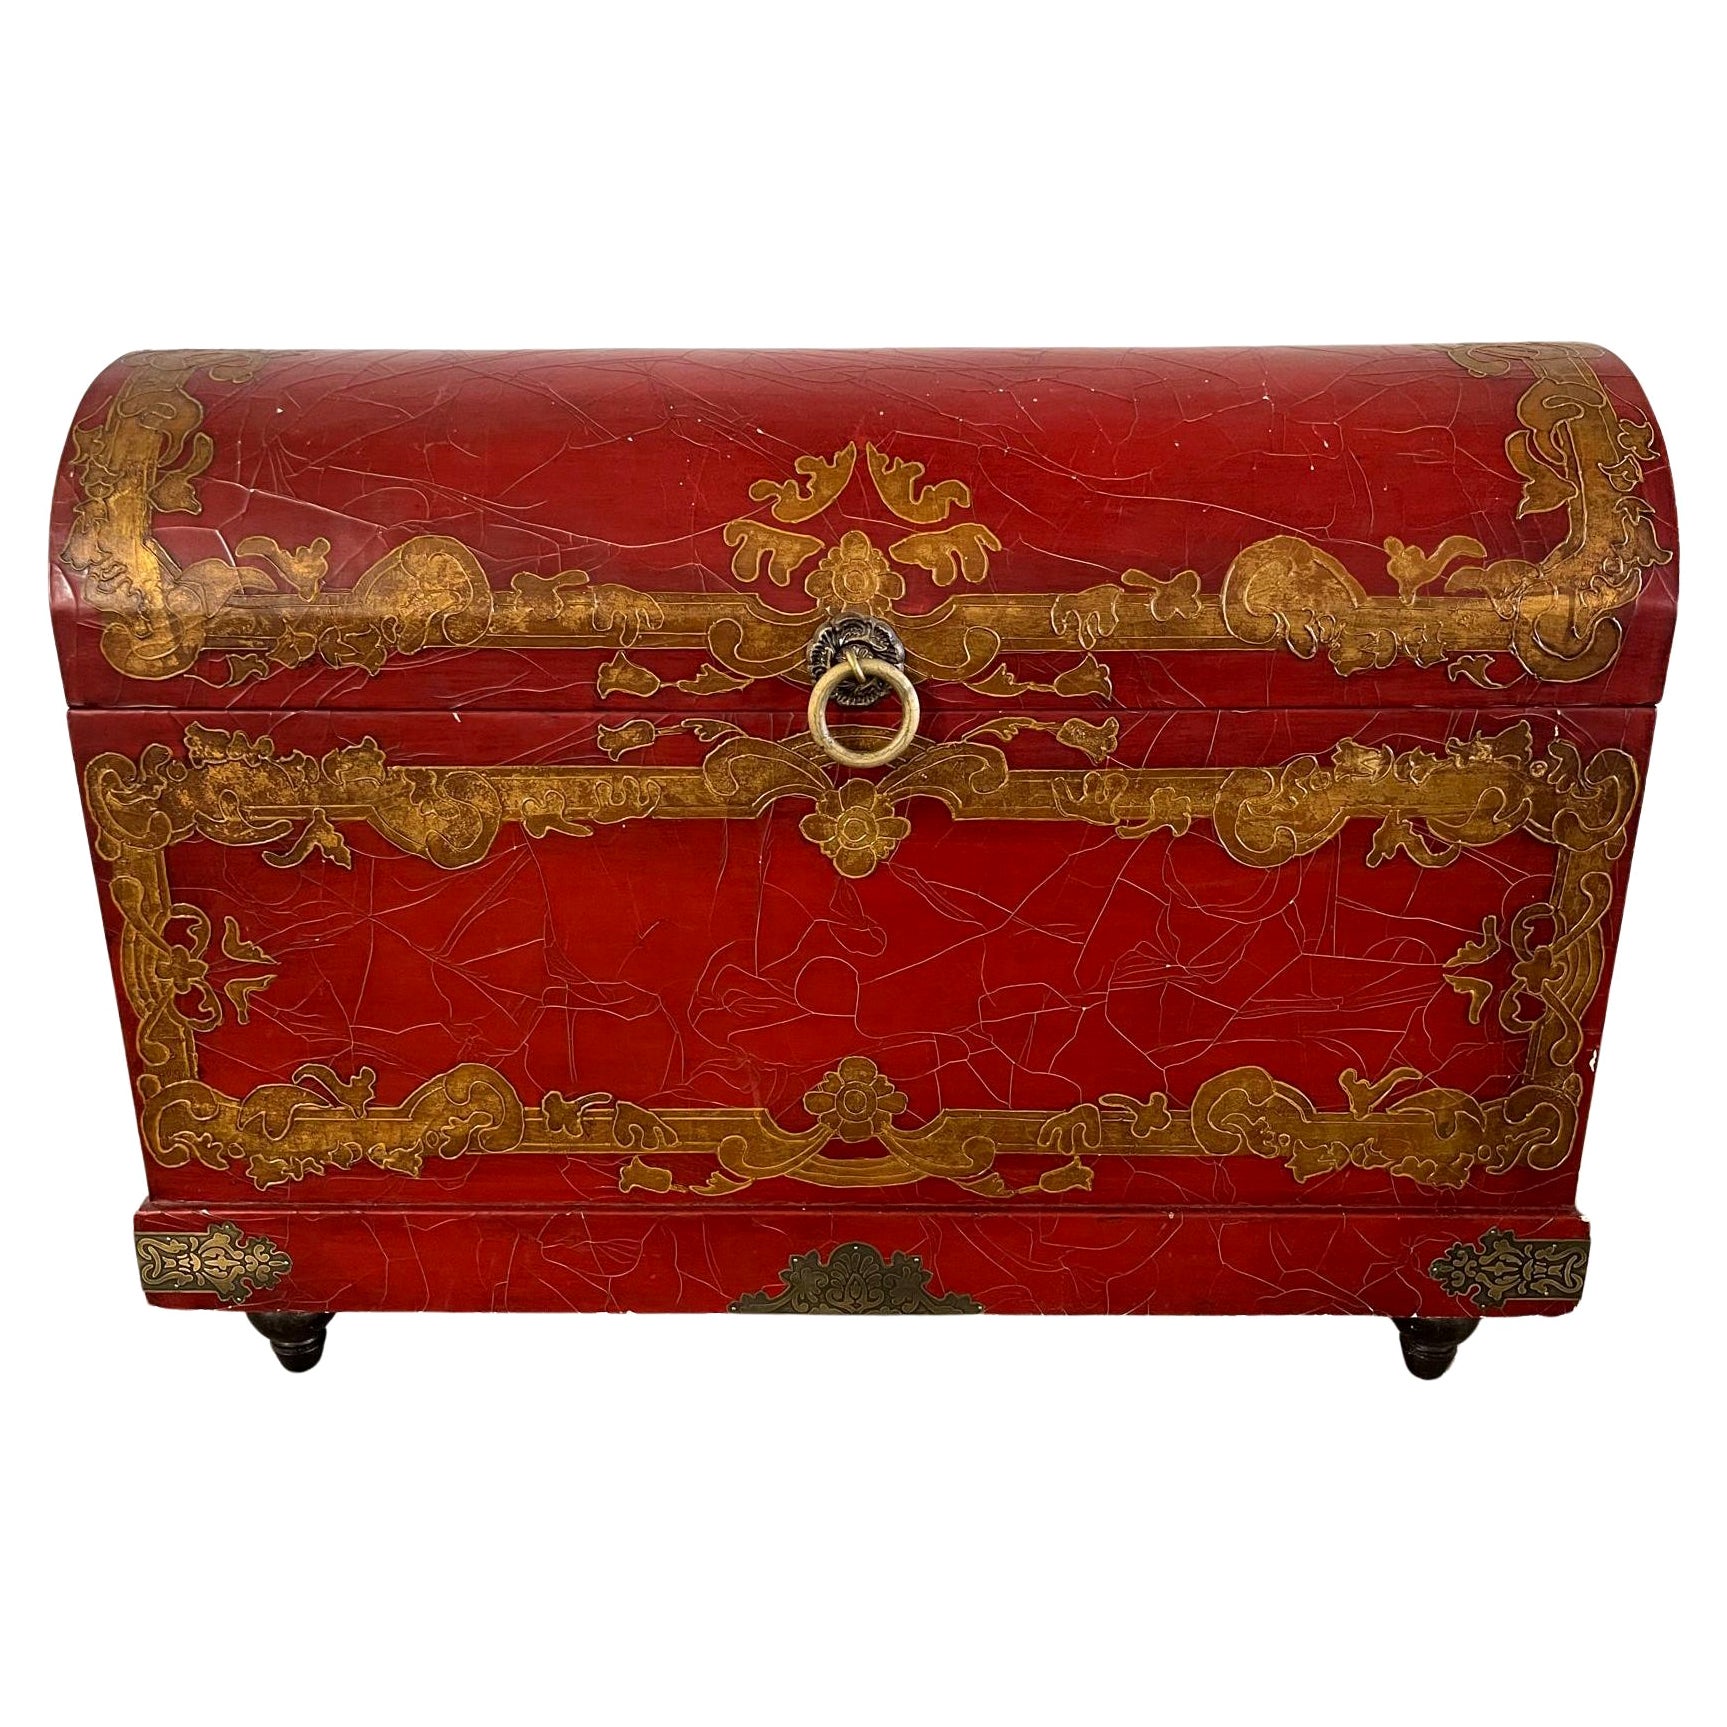 Chinese Red Lacquer and Gold Detailing Dome Top Trunk on Feet, 20th Century For Sale